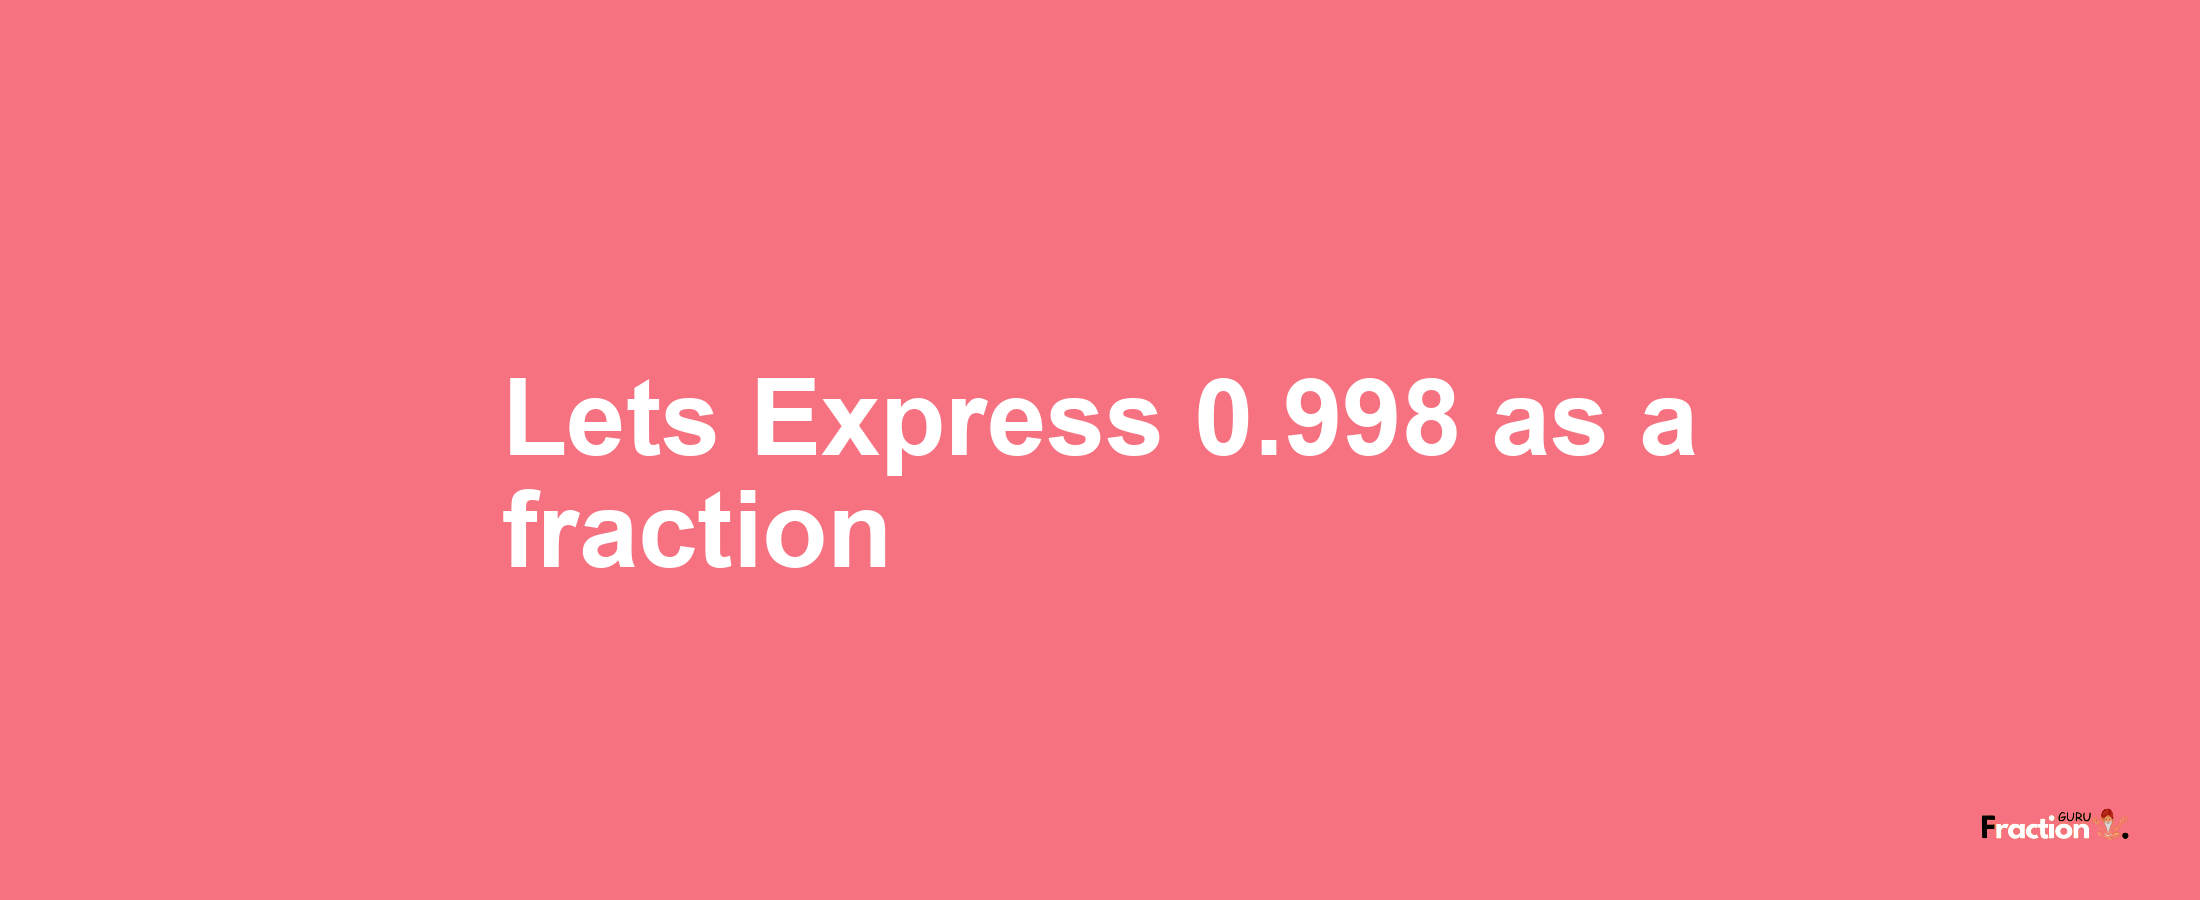 Lets Express 0.998 as afraction